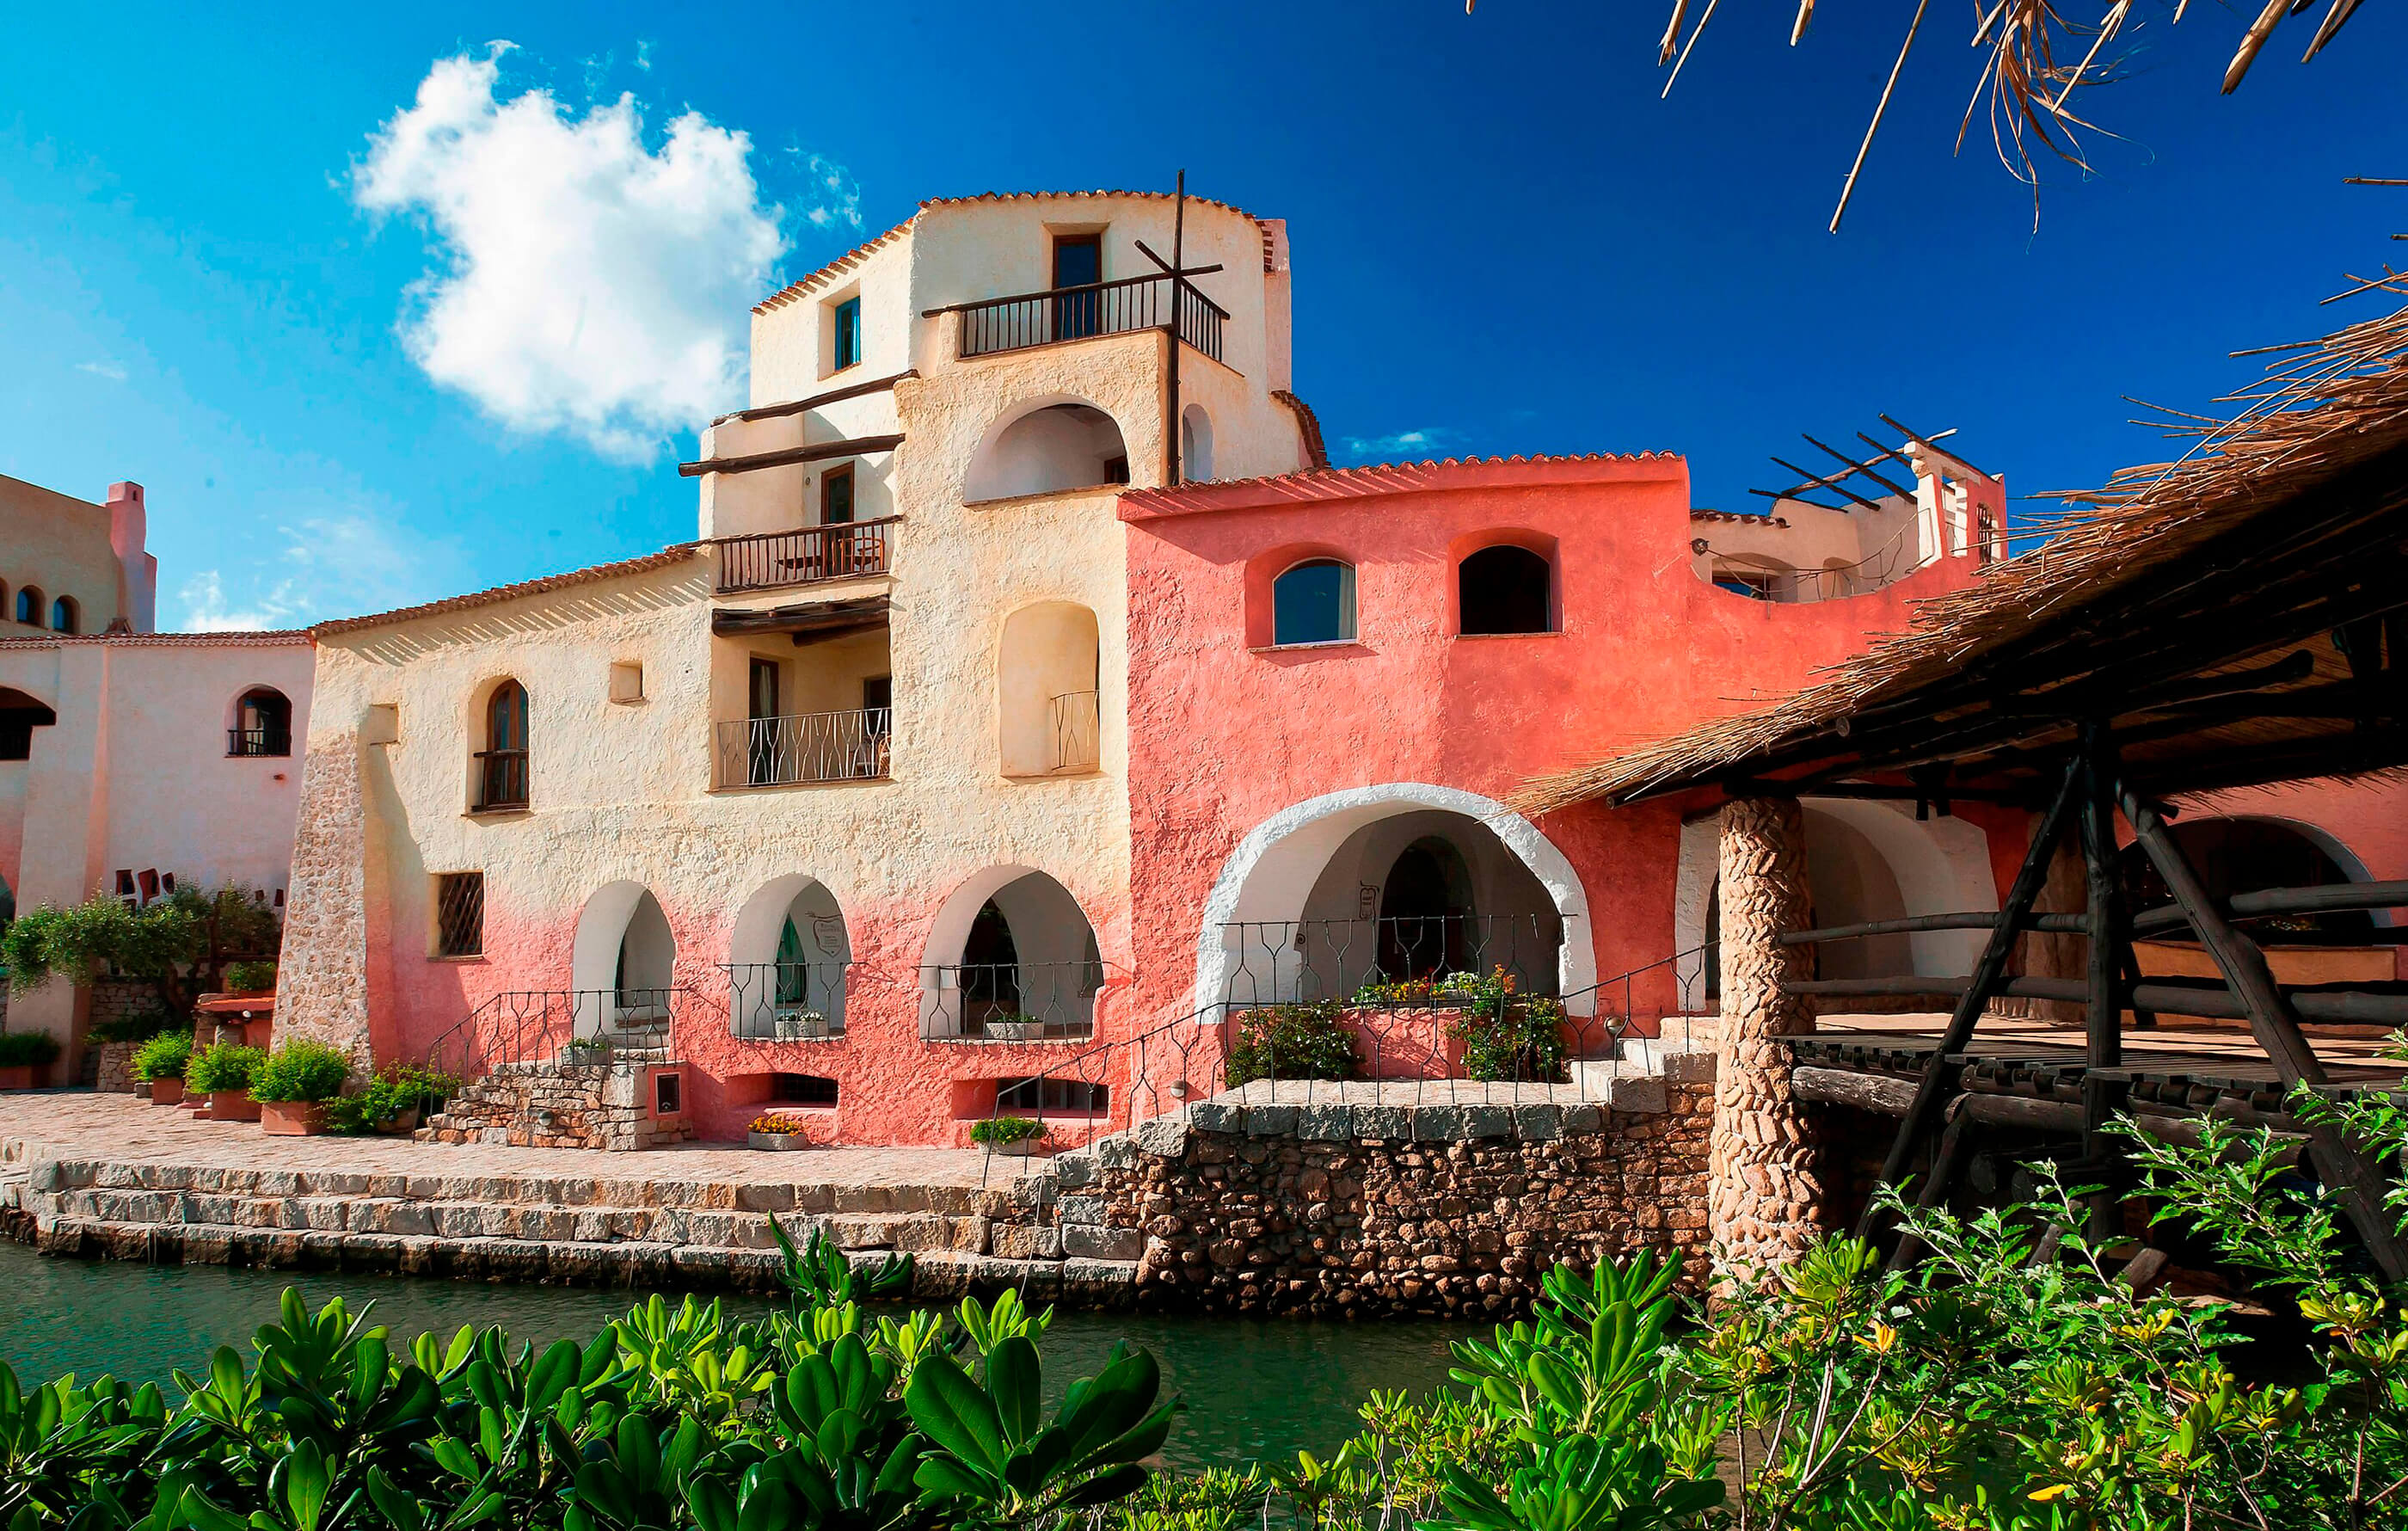 Full screen image of a photo of the Cala Di Volpe Hotel, in Sardinia, with a thatched roof walkway and rough rendered buildings covered in pastel pink and yellow textures